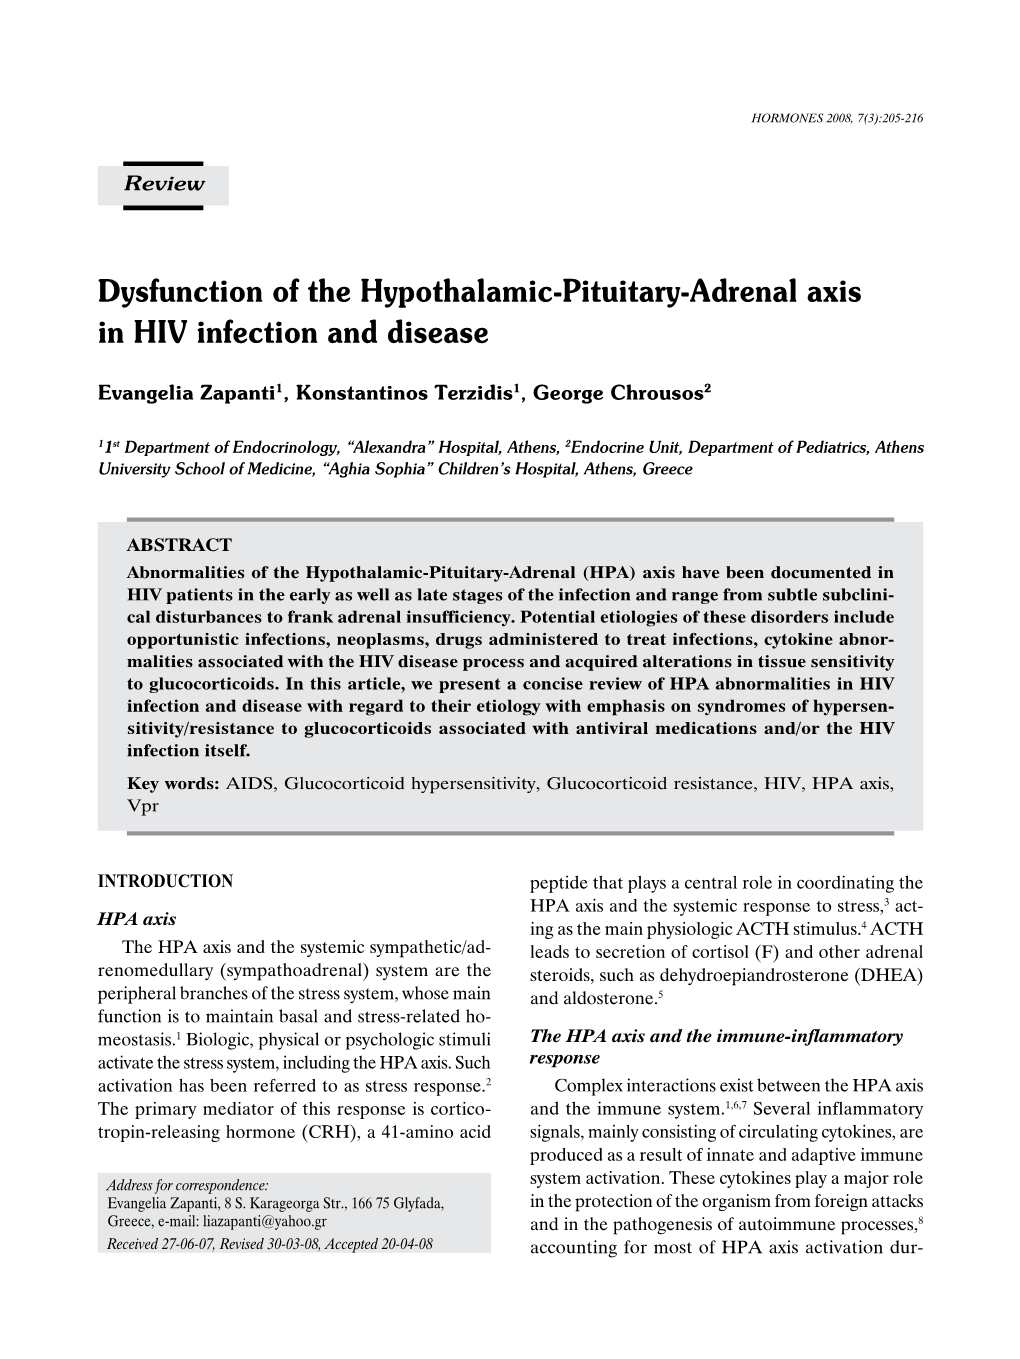 Dysfunction of the Hypothalamic-Pituitary-Adrenal Axis in HIV Infection and Disease